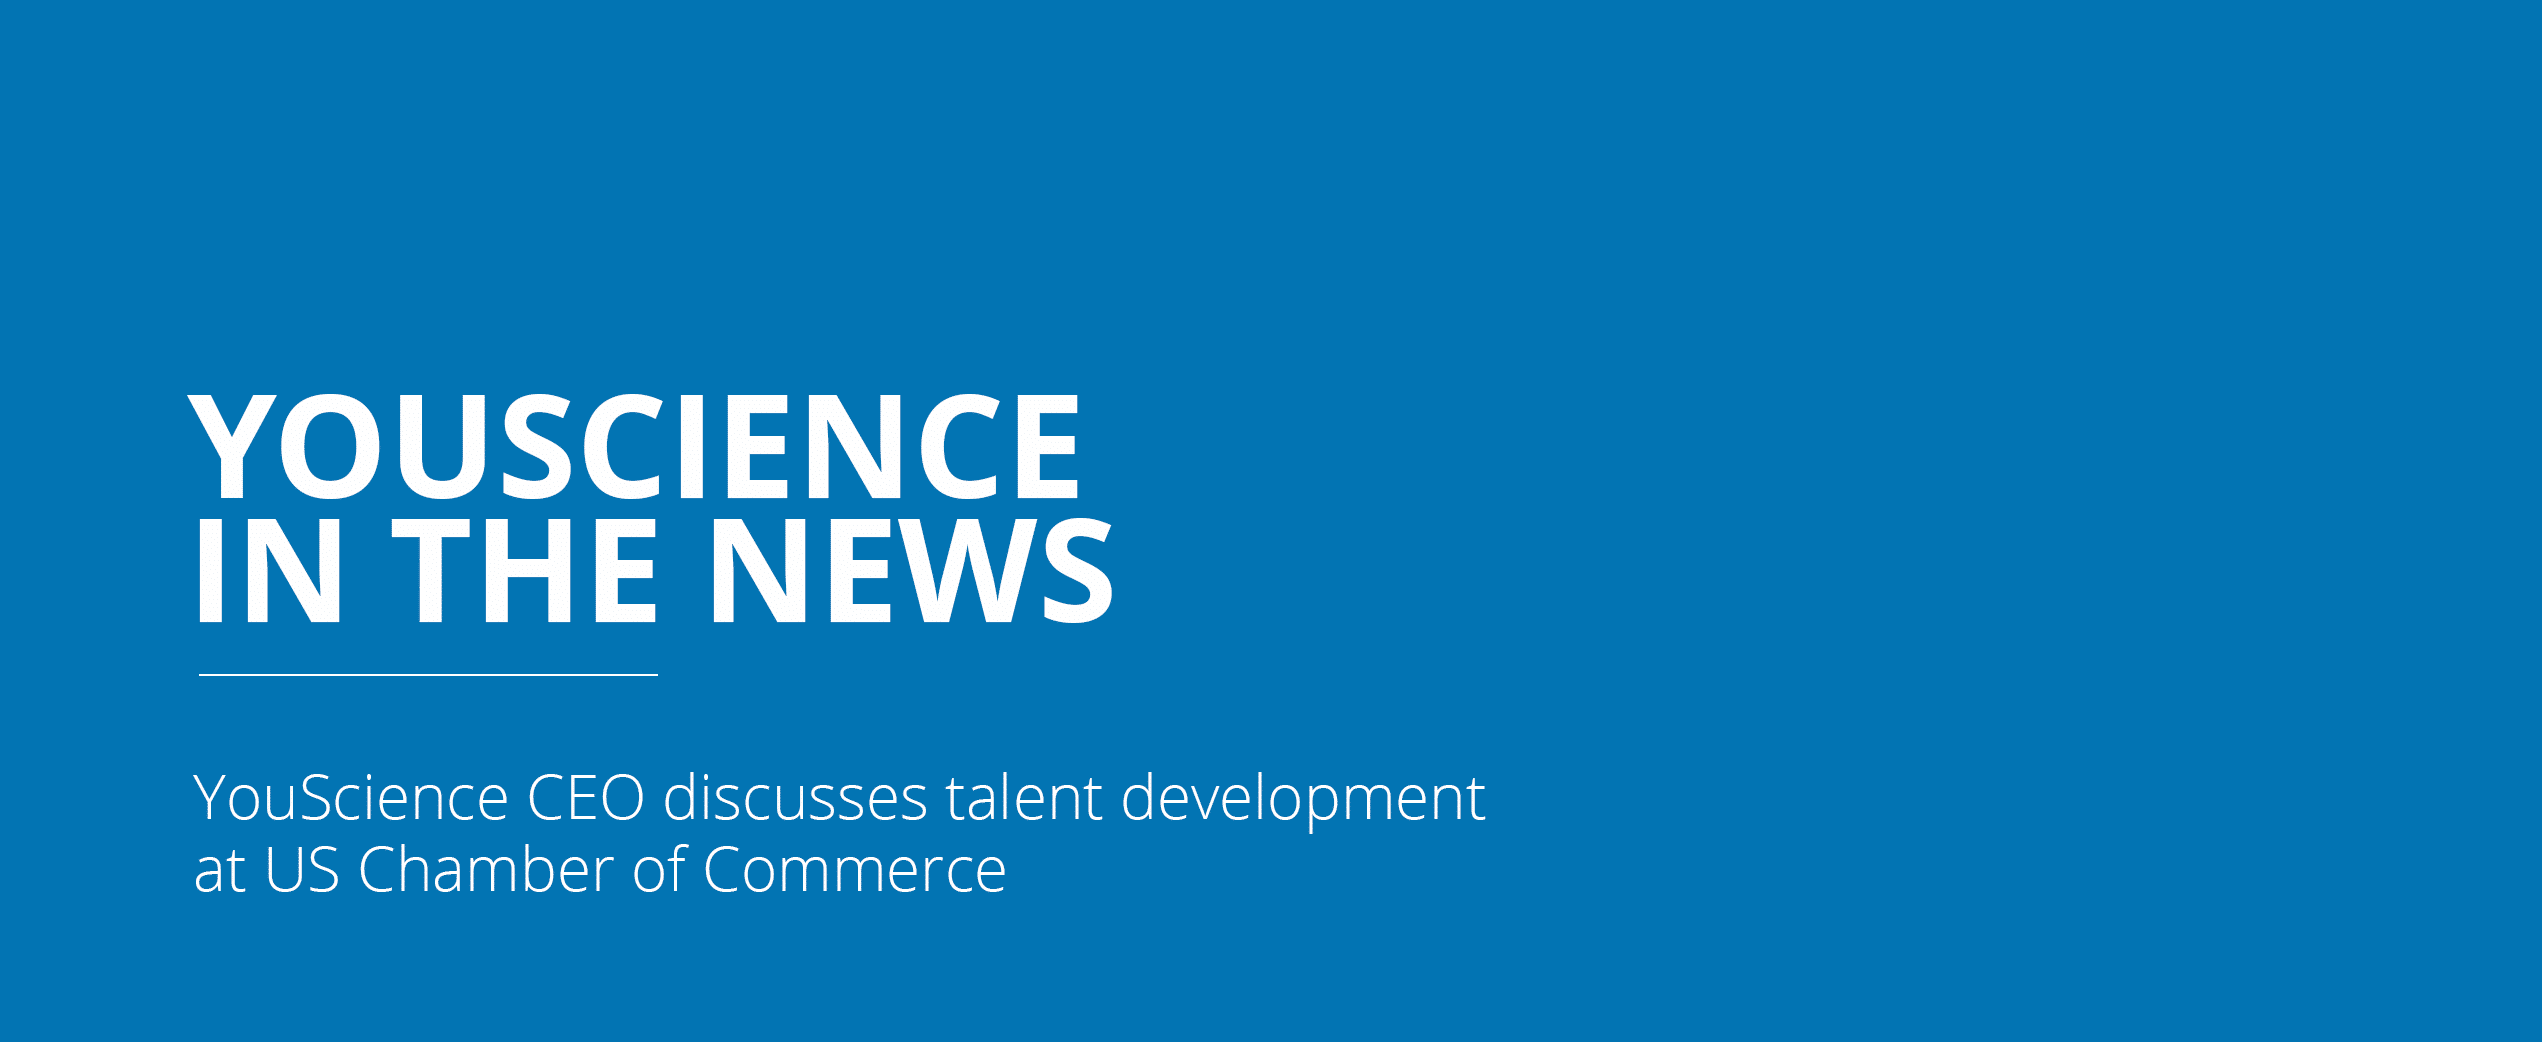 YouScience CEO discusses talent Development at US Chamber of Commerce